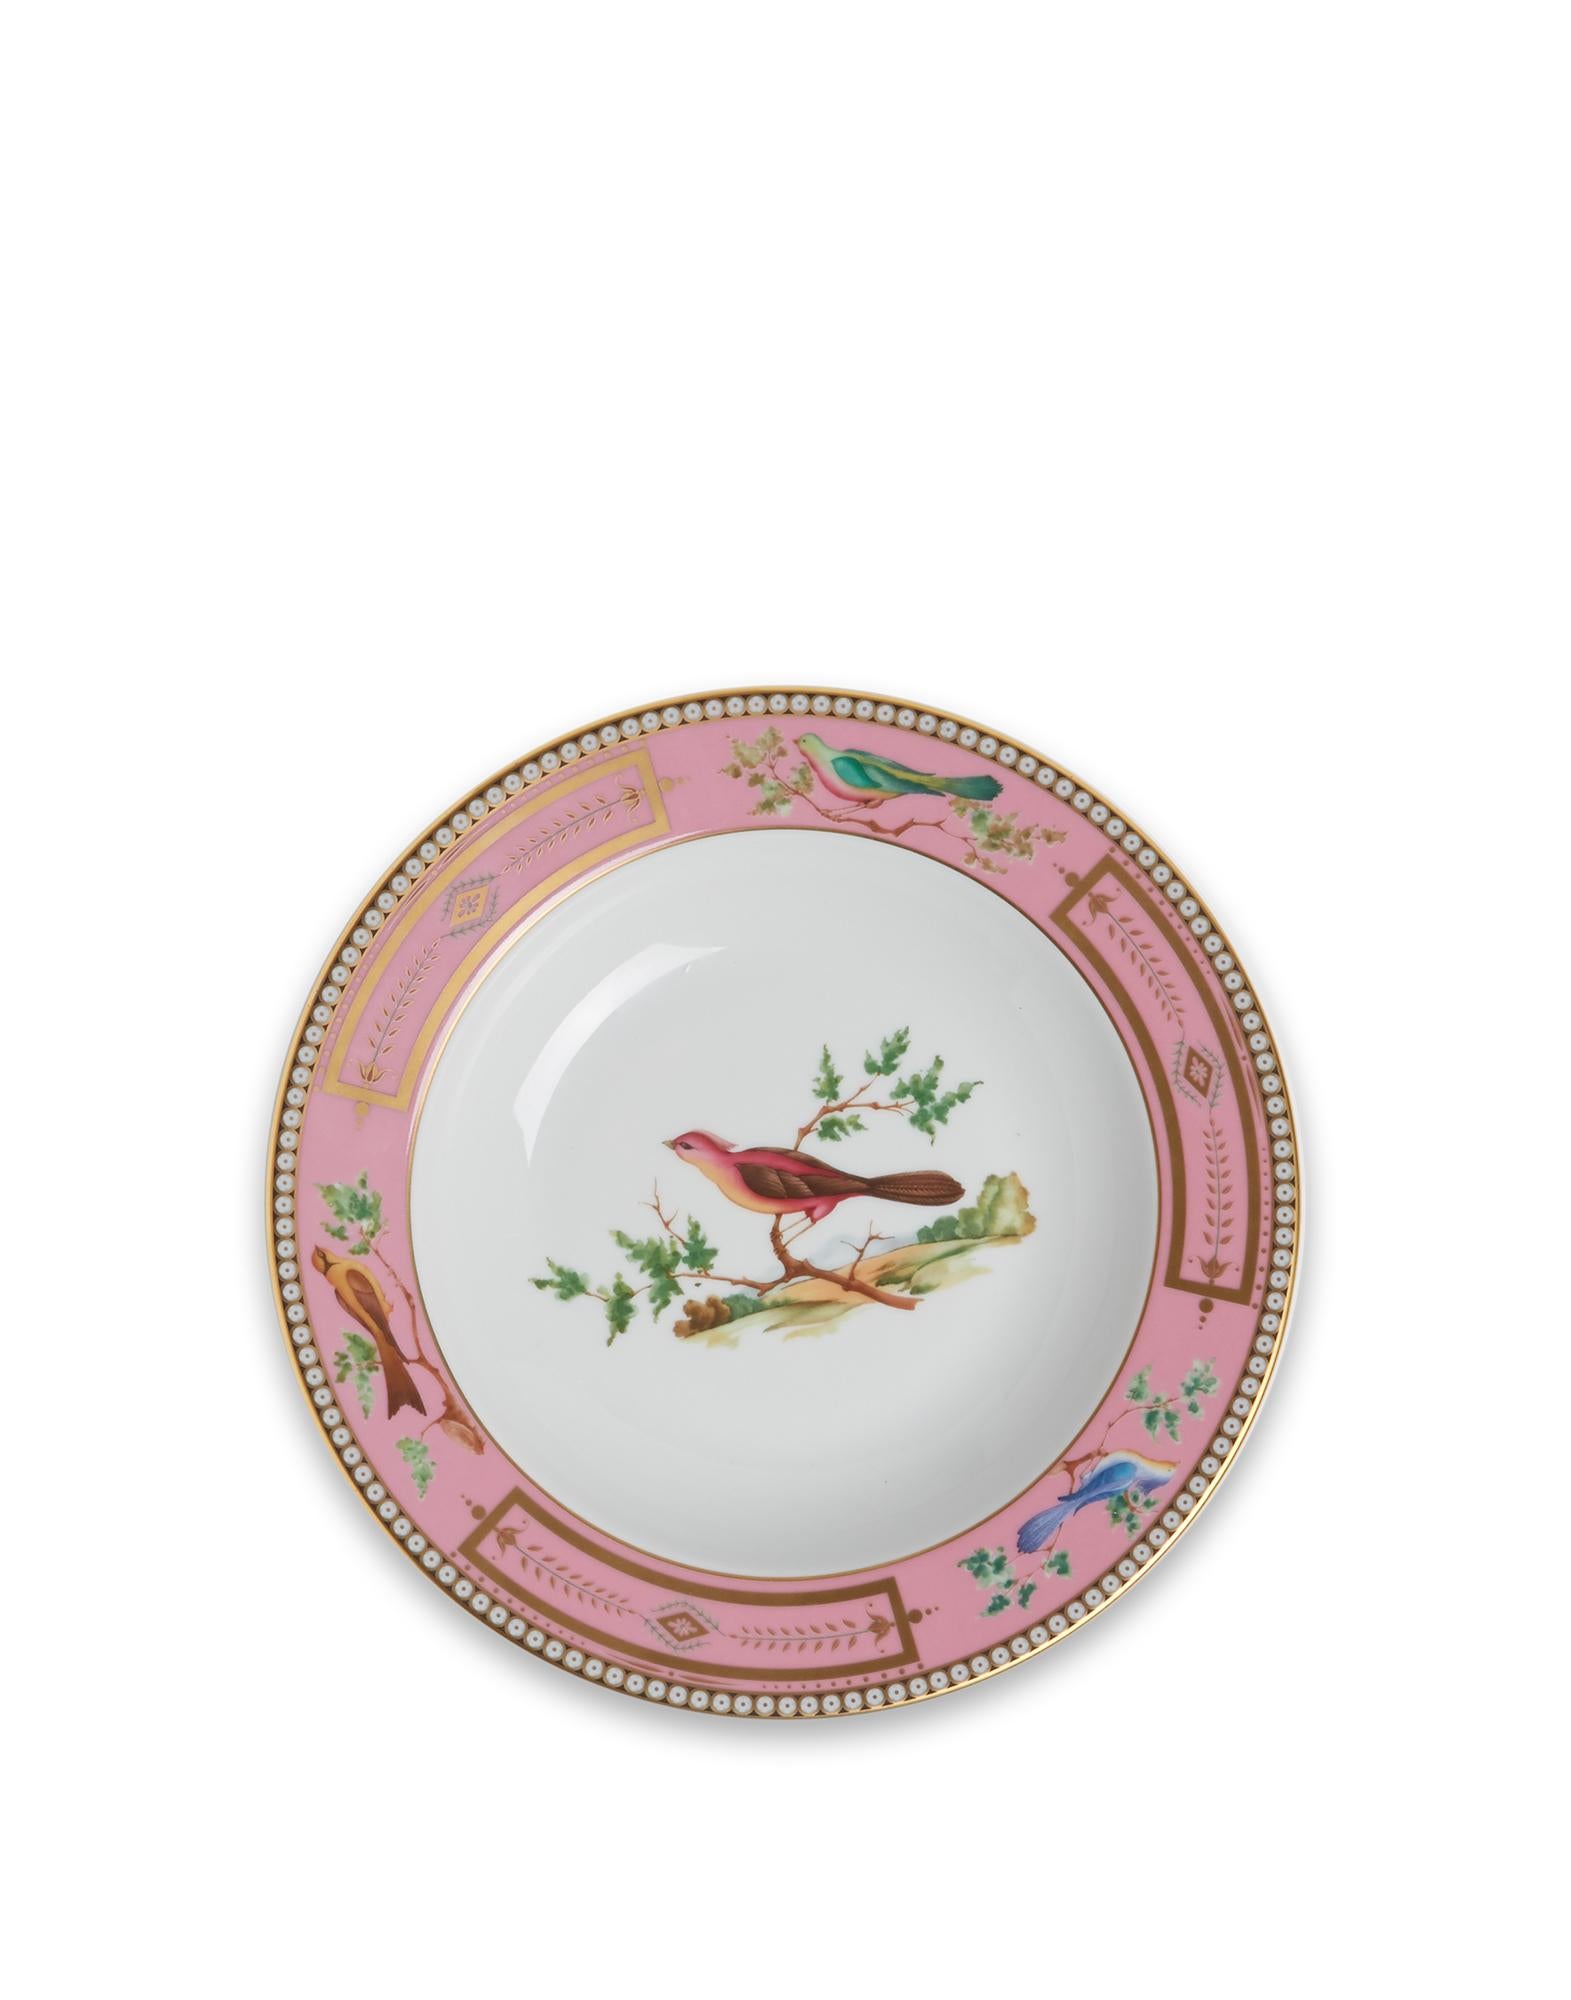 Our sensational Miniscalchi soup and dinner plate set is so exquisite you’ll want to save for best, but don’t - these beauties deserve to be admired everyday. The breathtaking bird motifs you see here originally featured on plates belonging to the